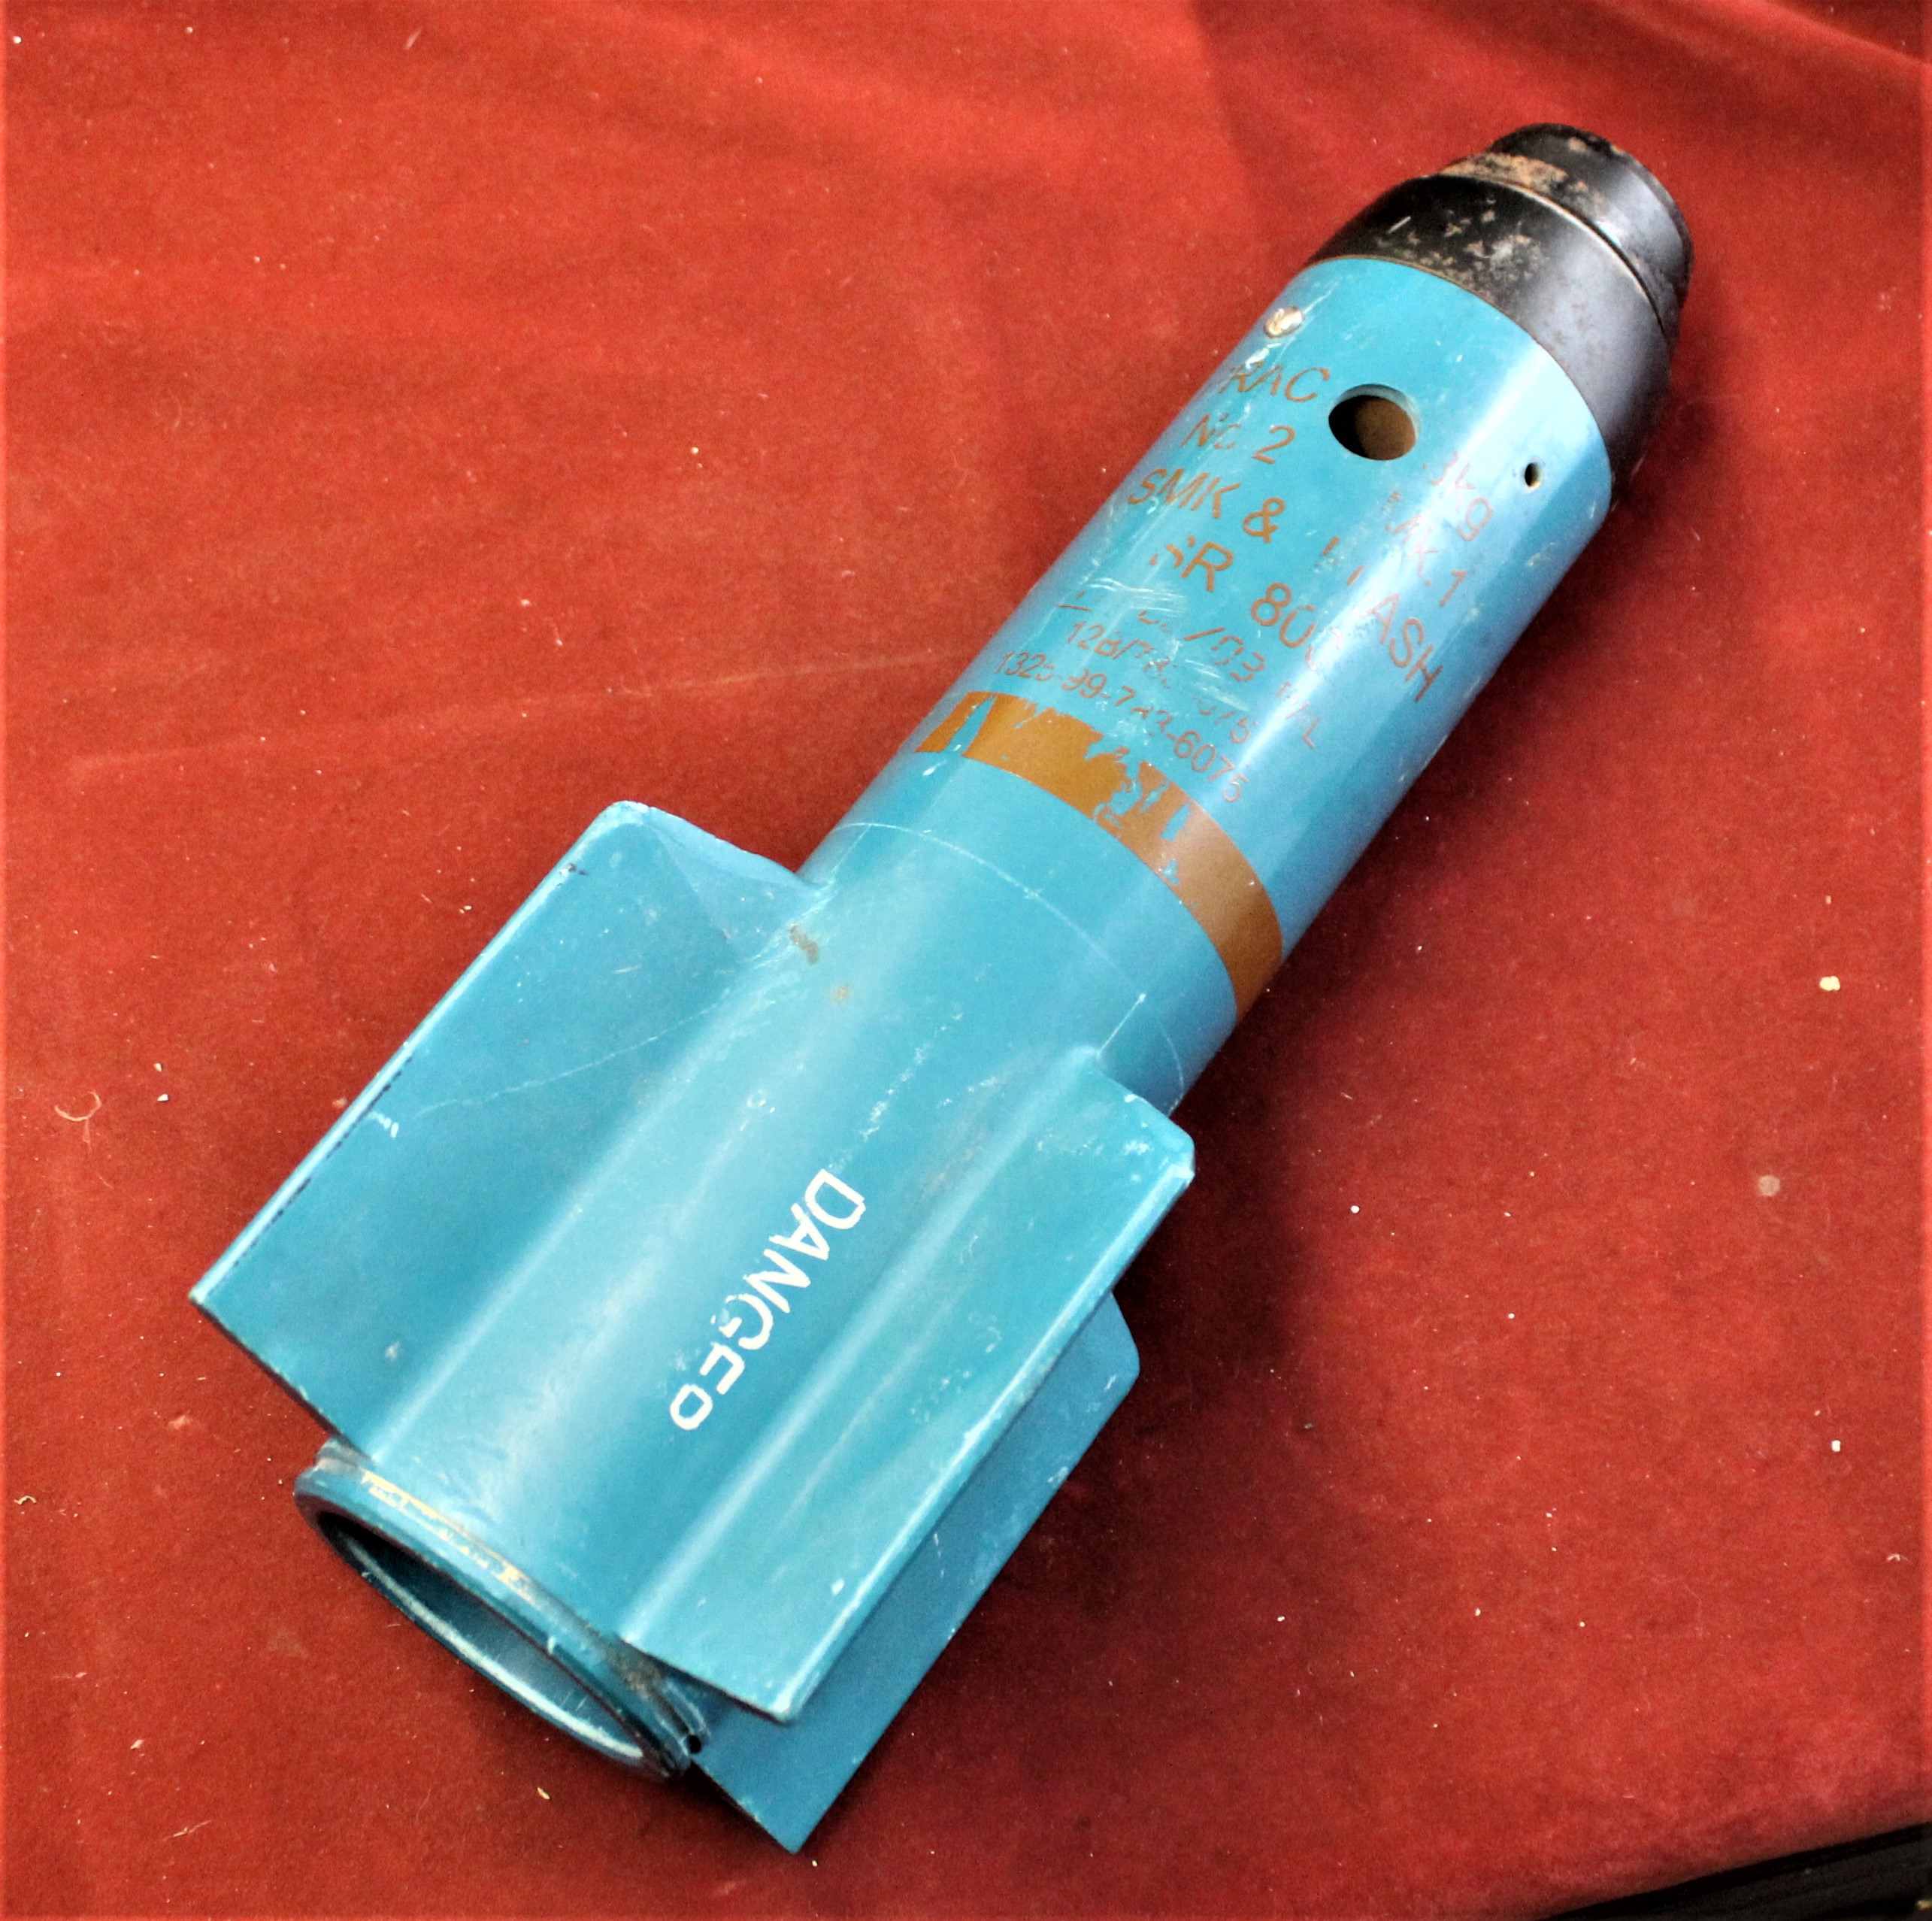 British 3kg Practice Smoke and Flash Bomb No.2 MK.1 SR 800, good stencilling, in used condition